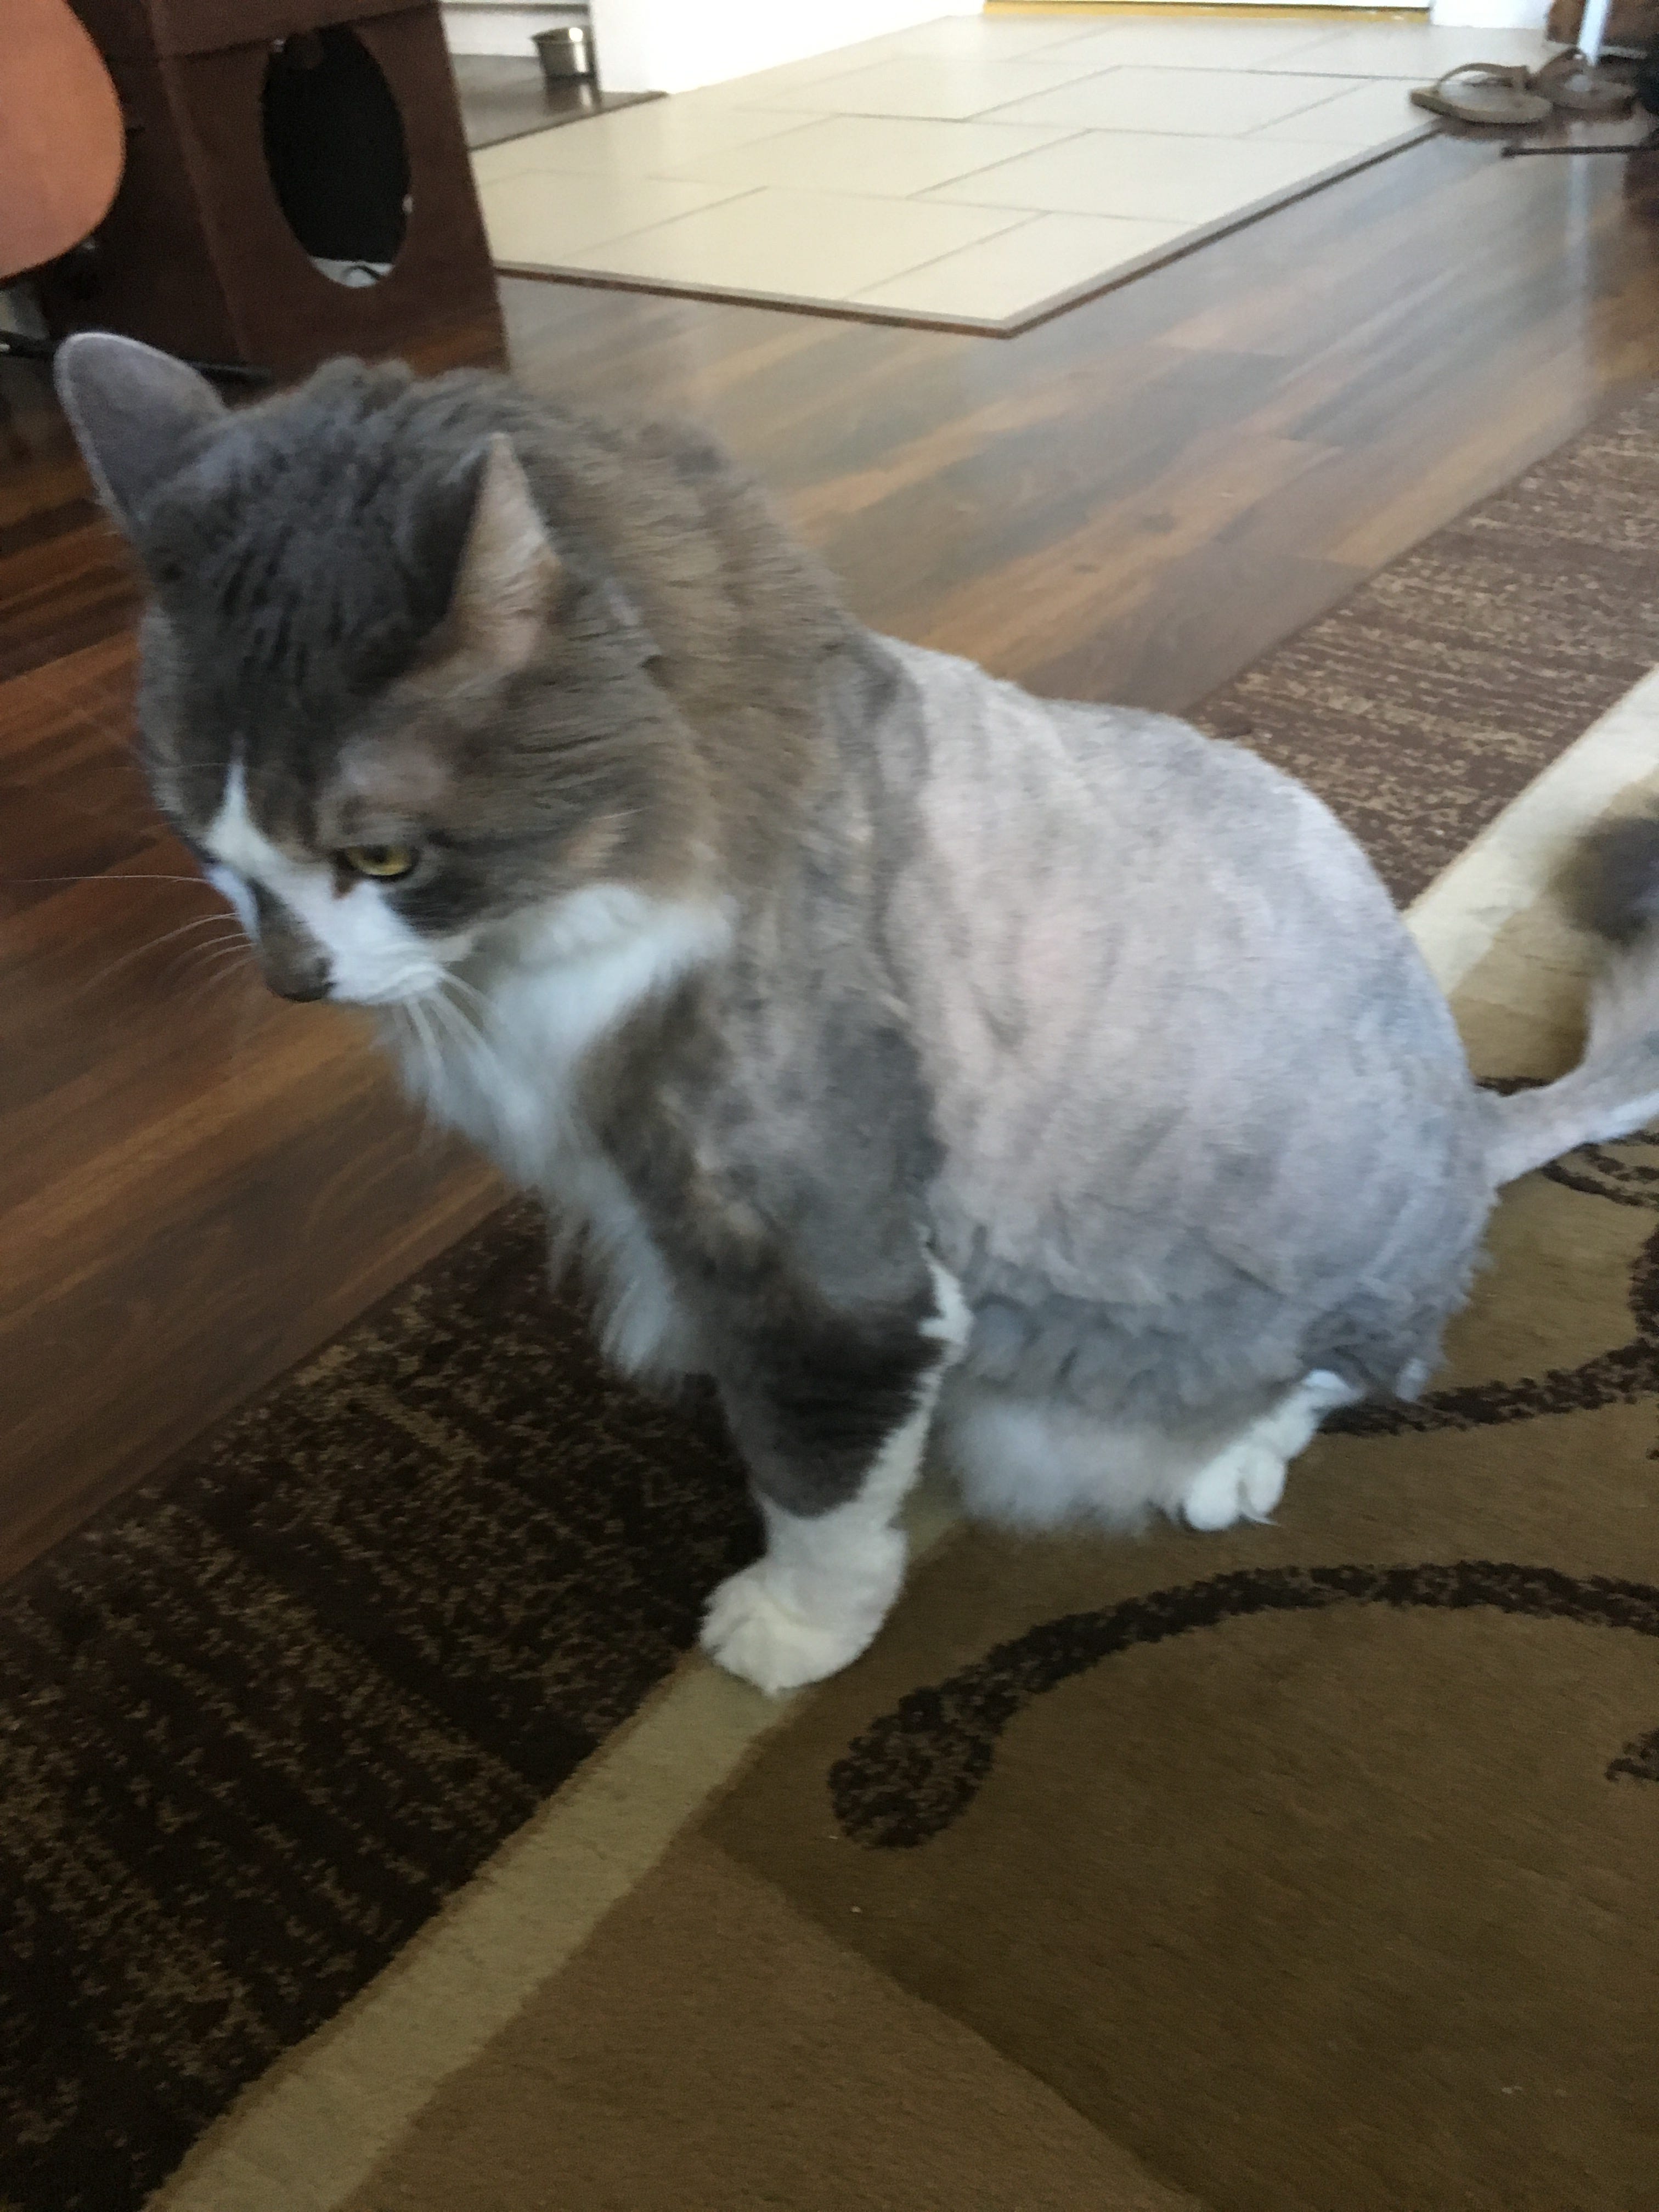 I shaved my cat so now he's mad at me 